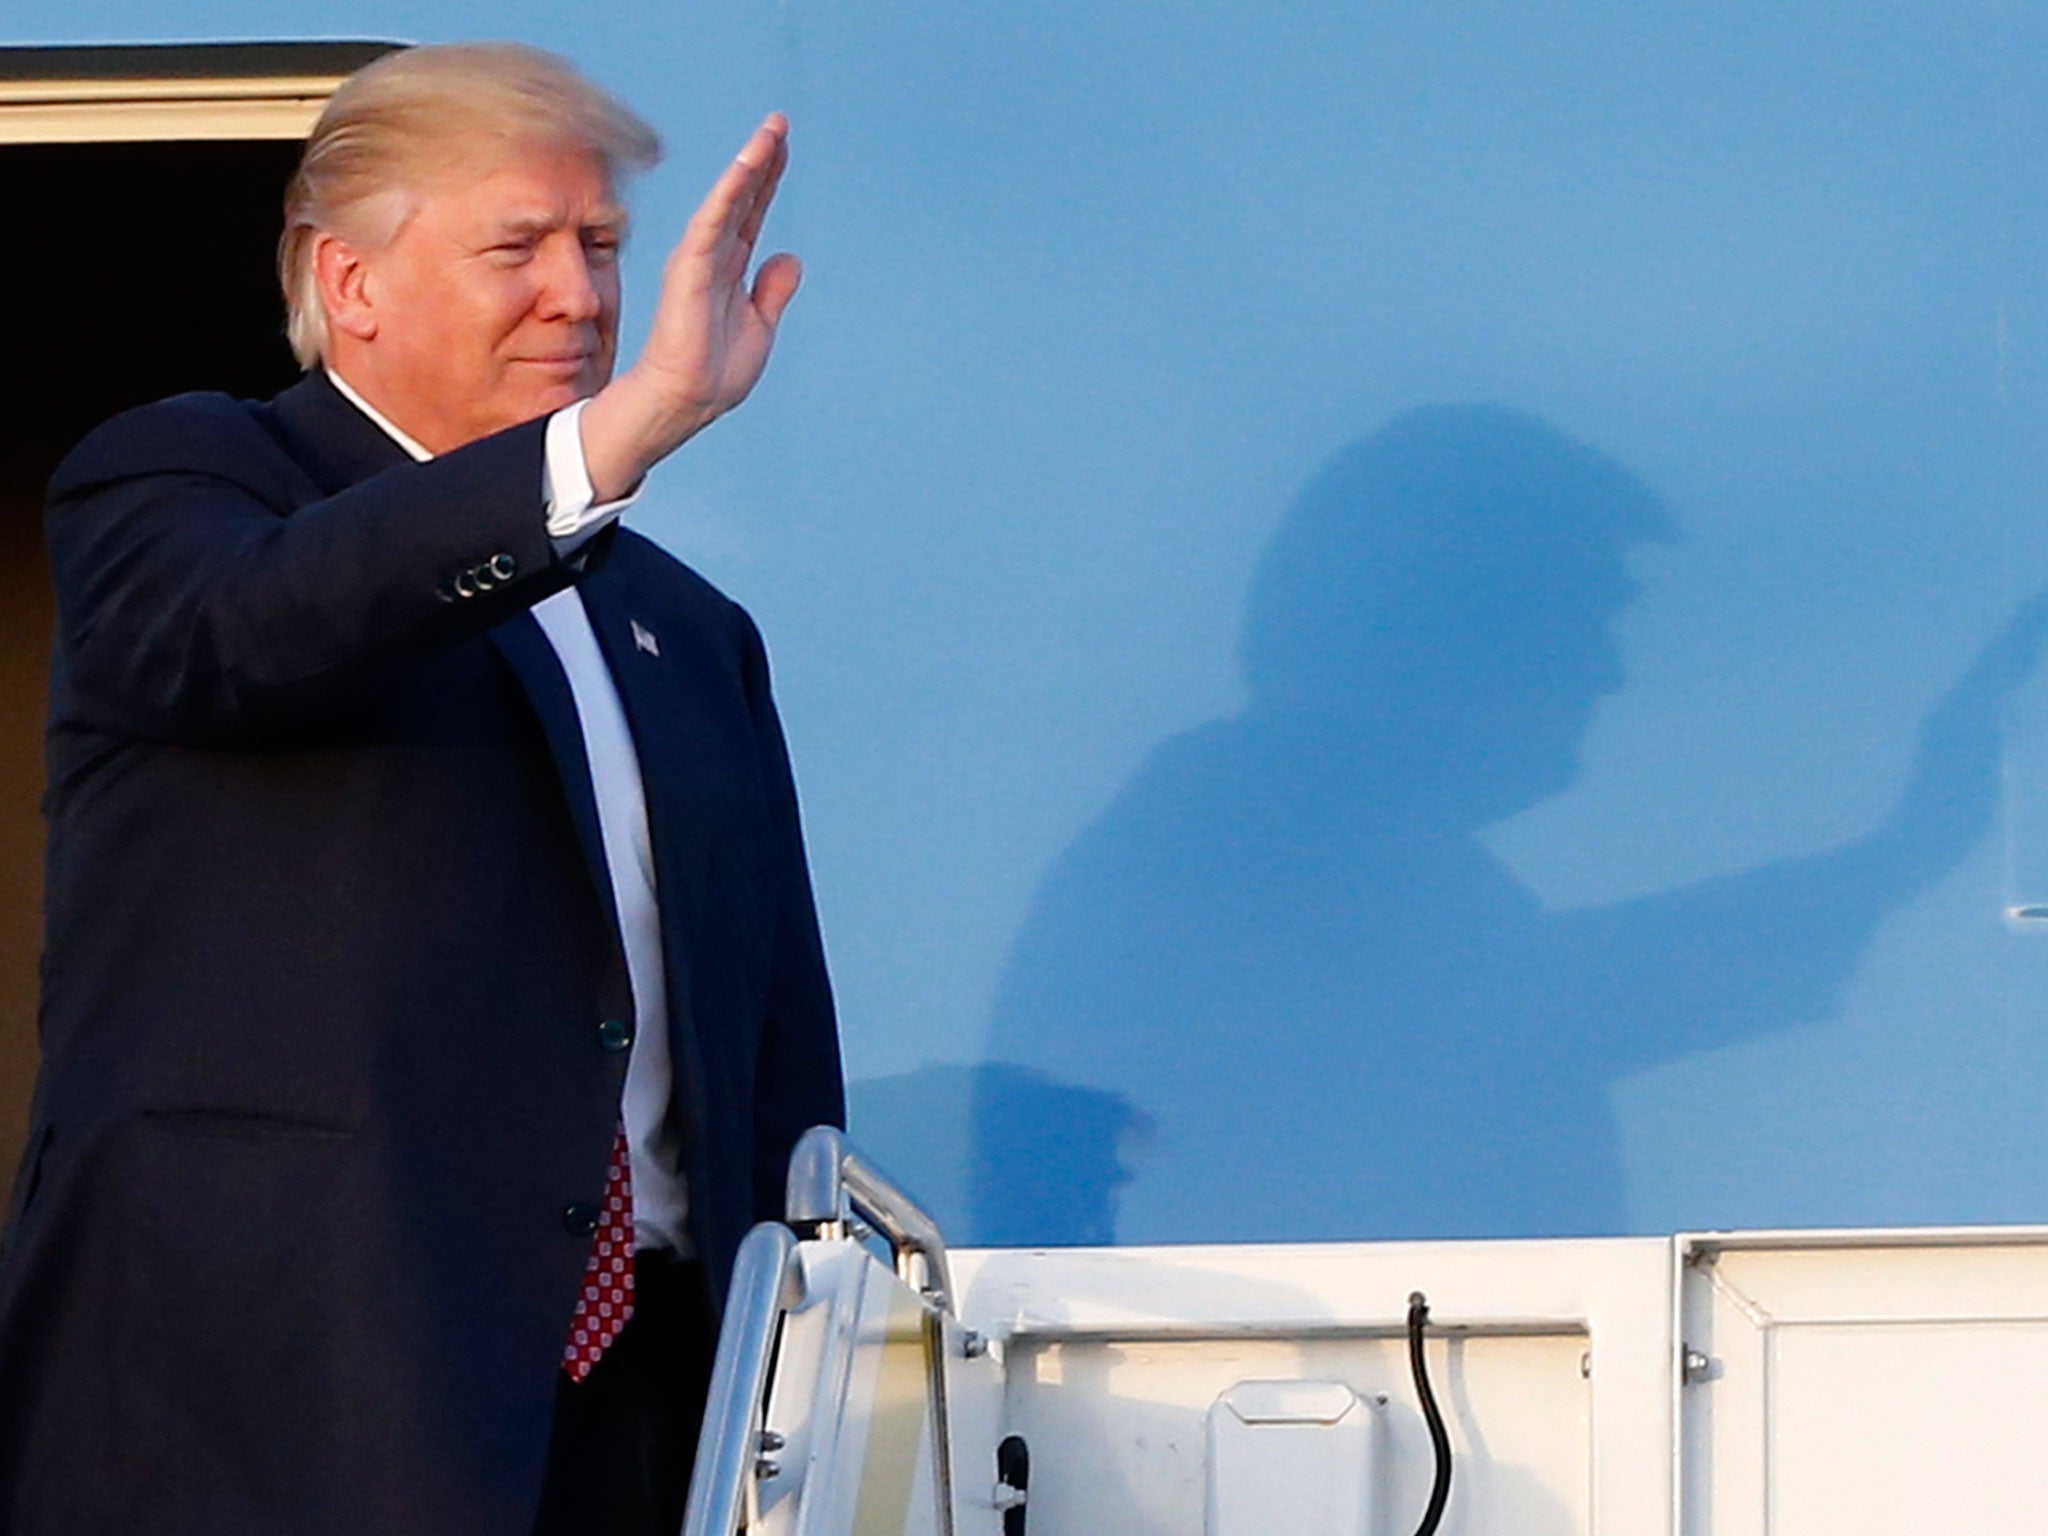 President Donald Trump waves to supporters on the steps of Air Force One